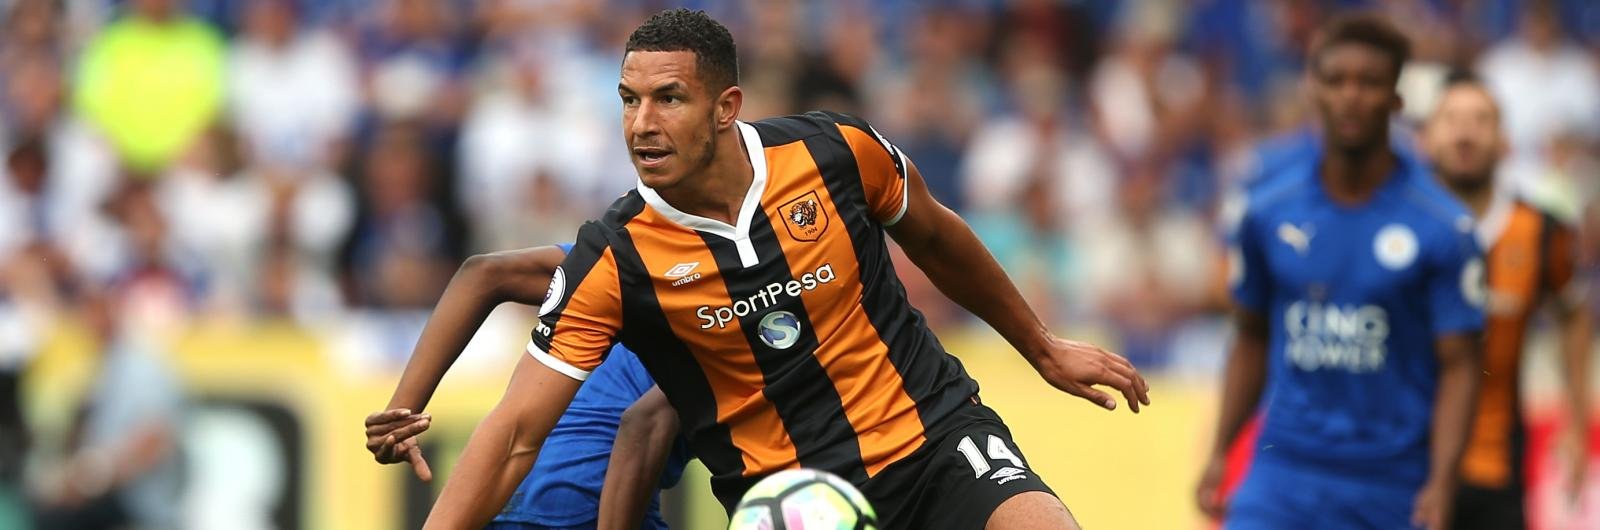 Five games in, and against all odds, Hull City continue to step up to the mark